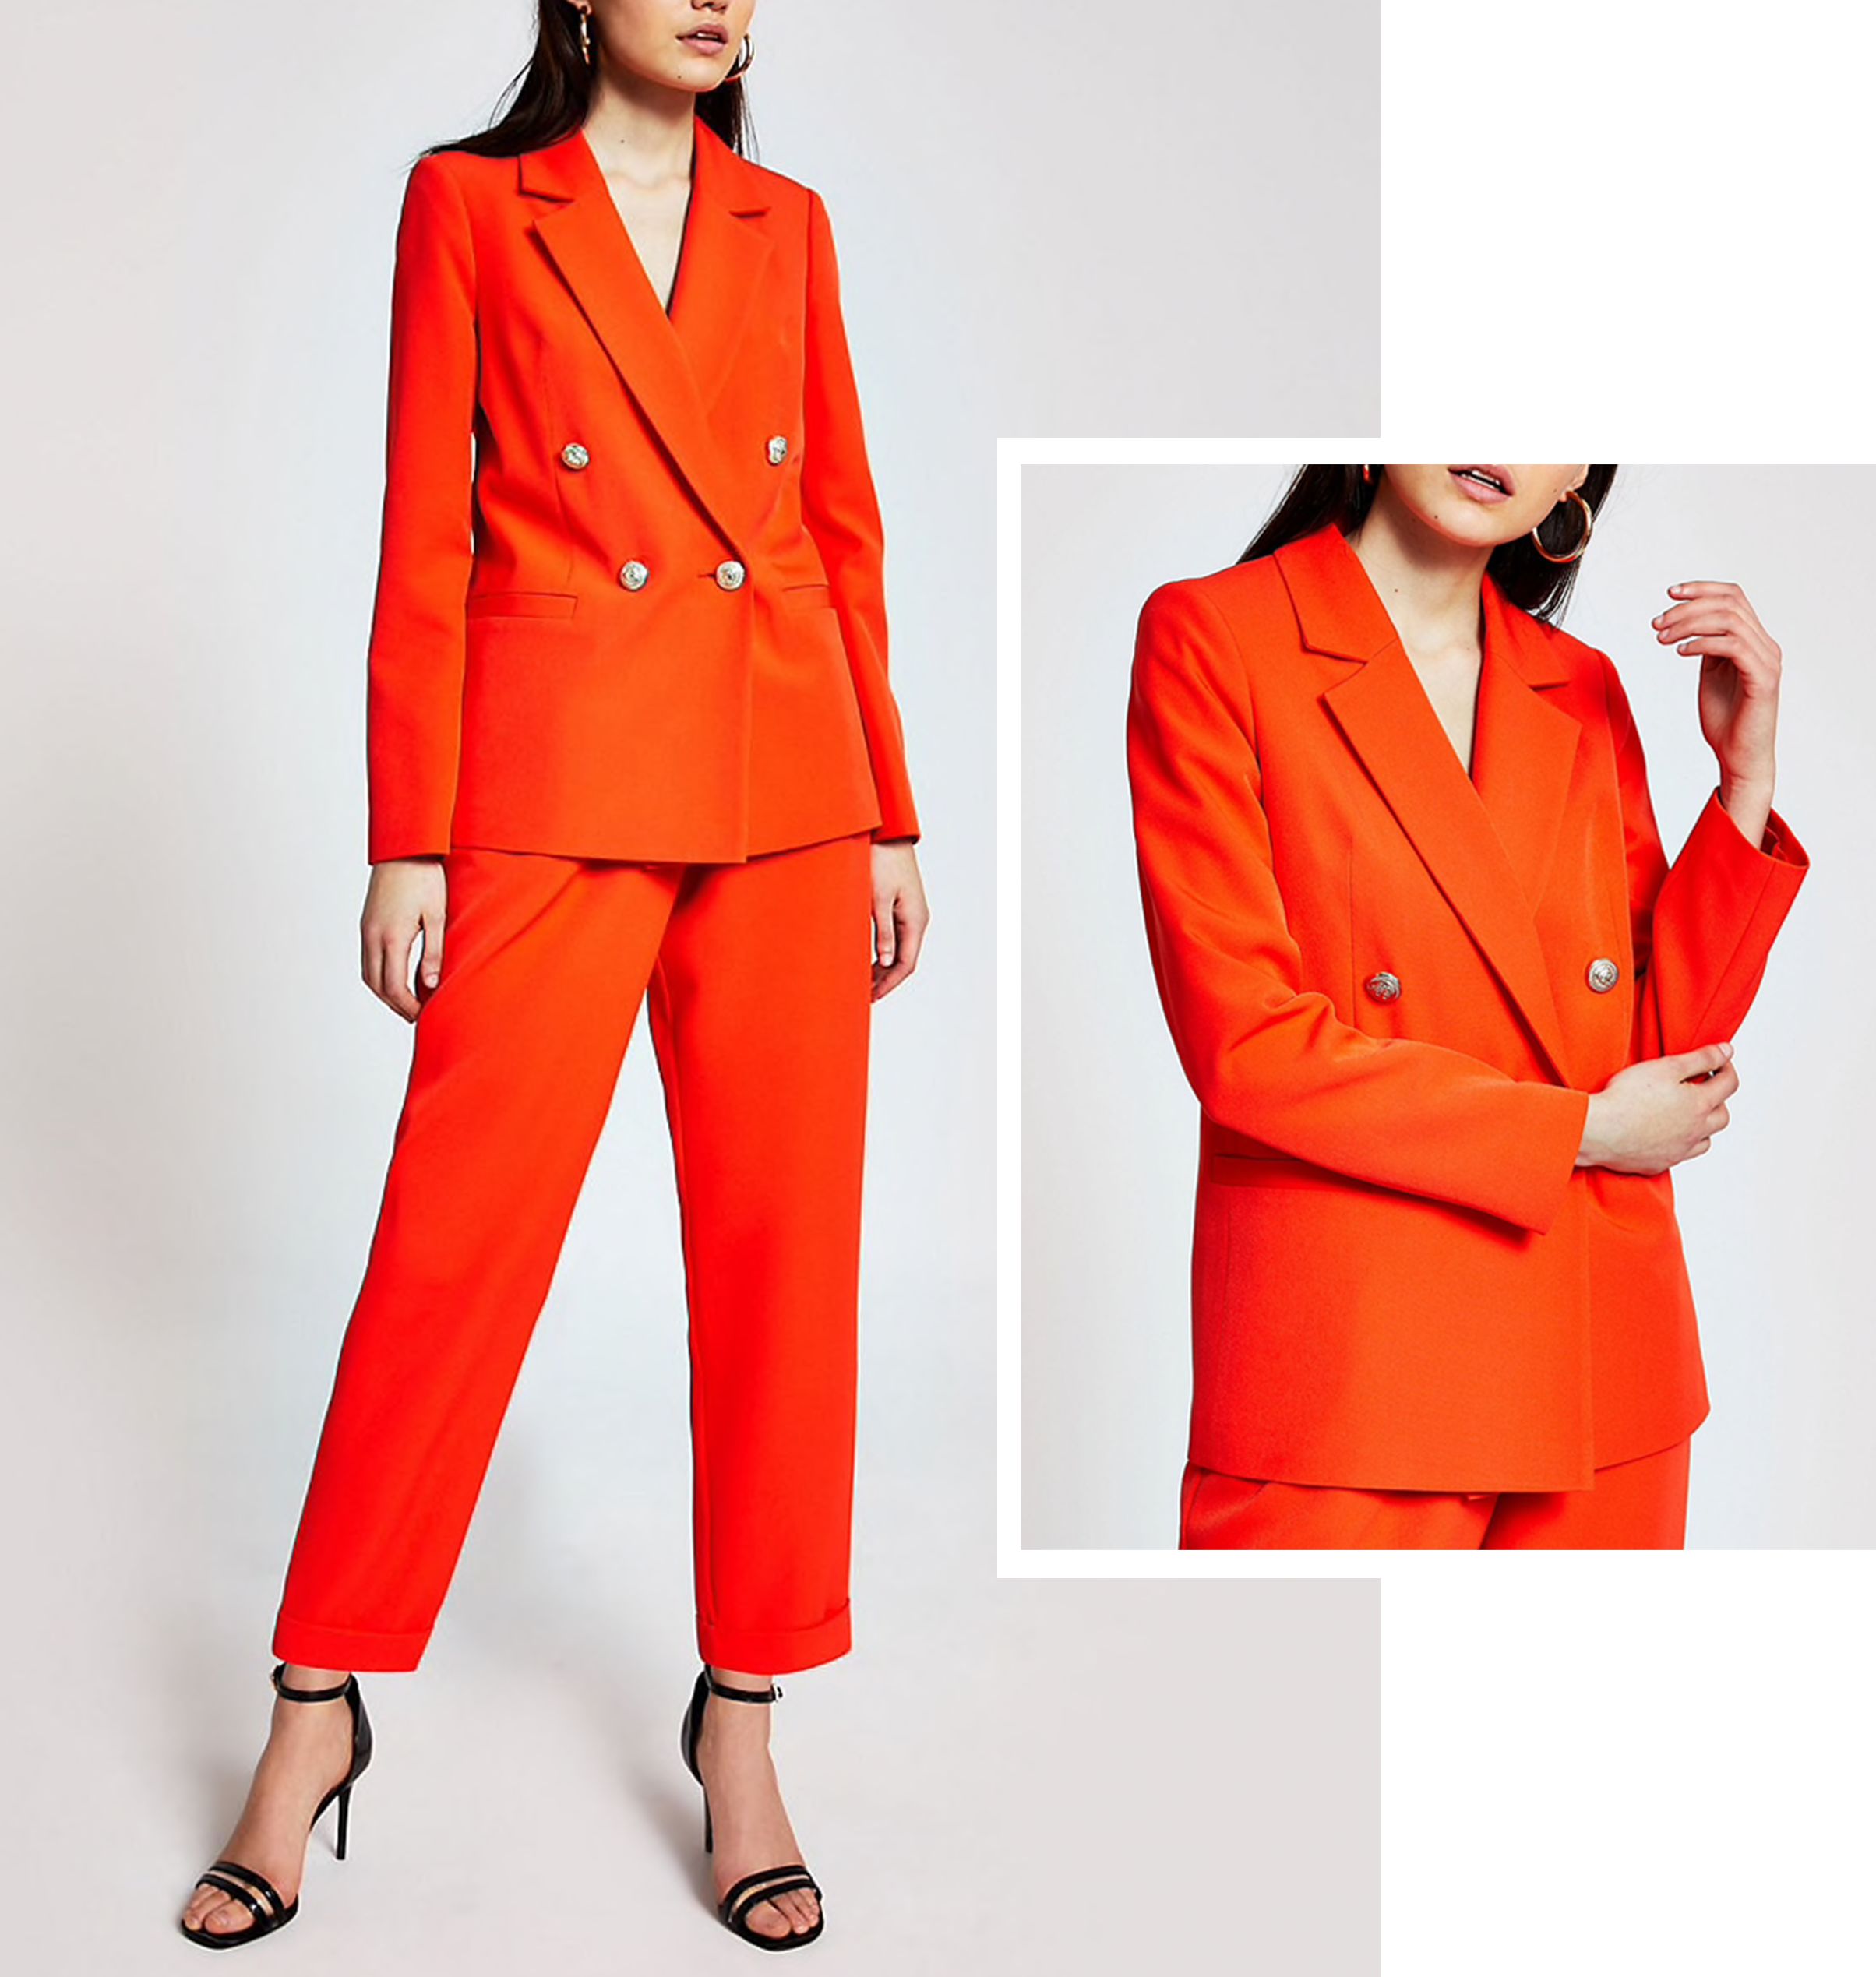  VREWARE womens jackets and coats,cheap stuff under 50 cents,cheap  orange sweatpants,beach sweater,bride robes for wedding day,save for later  items in my cart,overalls cheap : Clothing, Shoes & Jewelry